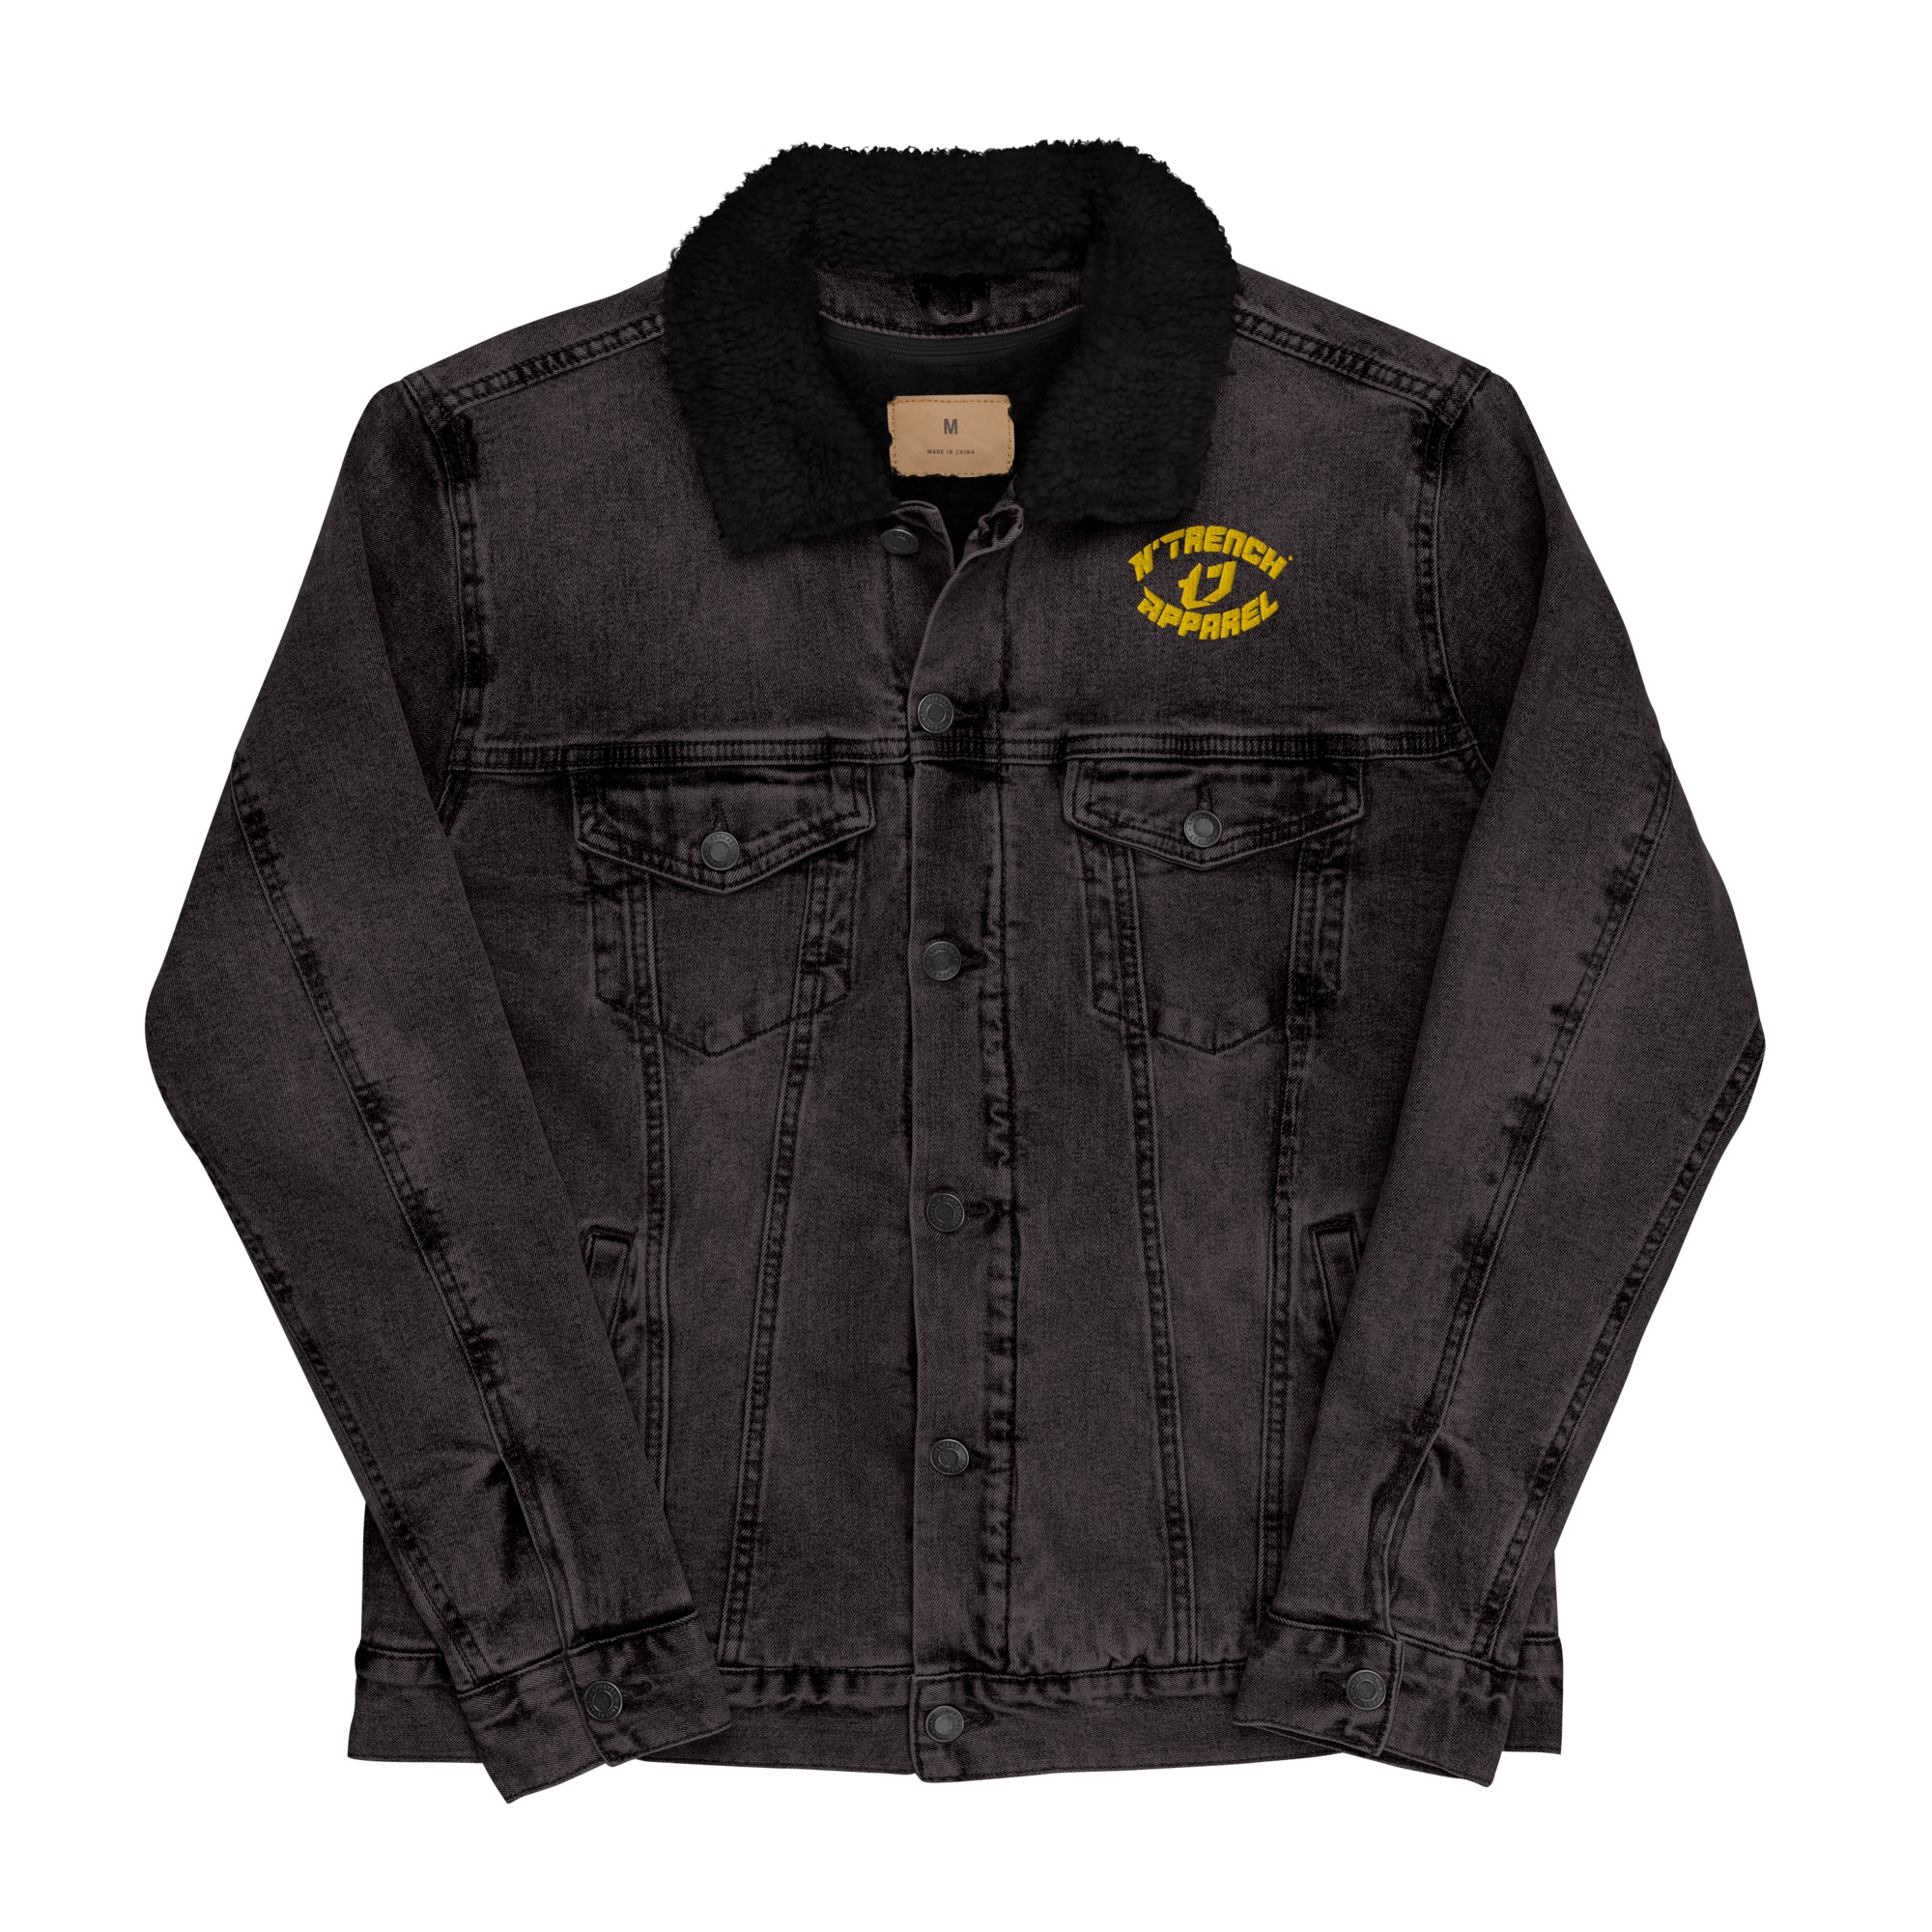 N'Trench Apparel Gold Lettering And Logo Men/Guys Embroidery denim sherpa jacket